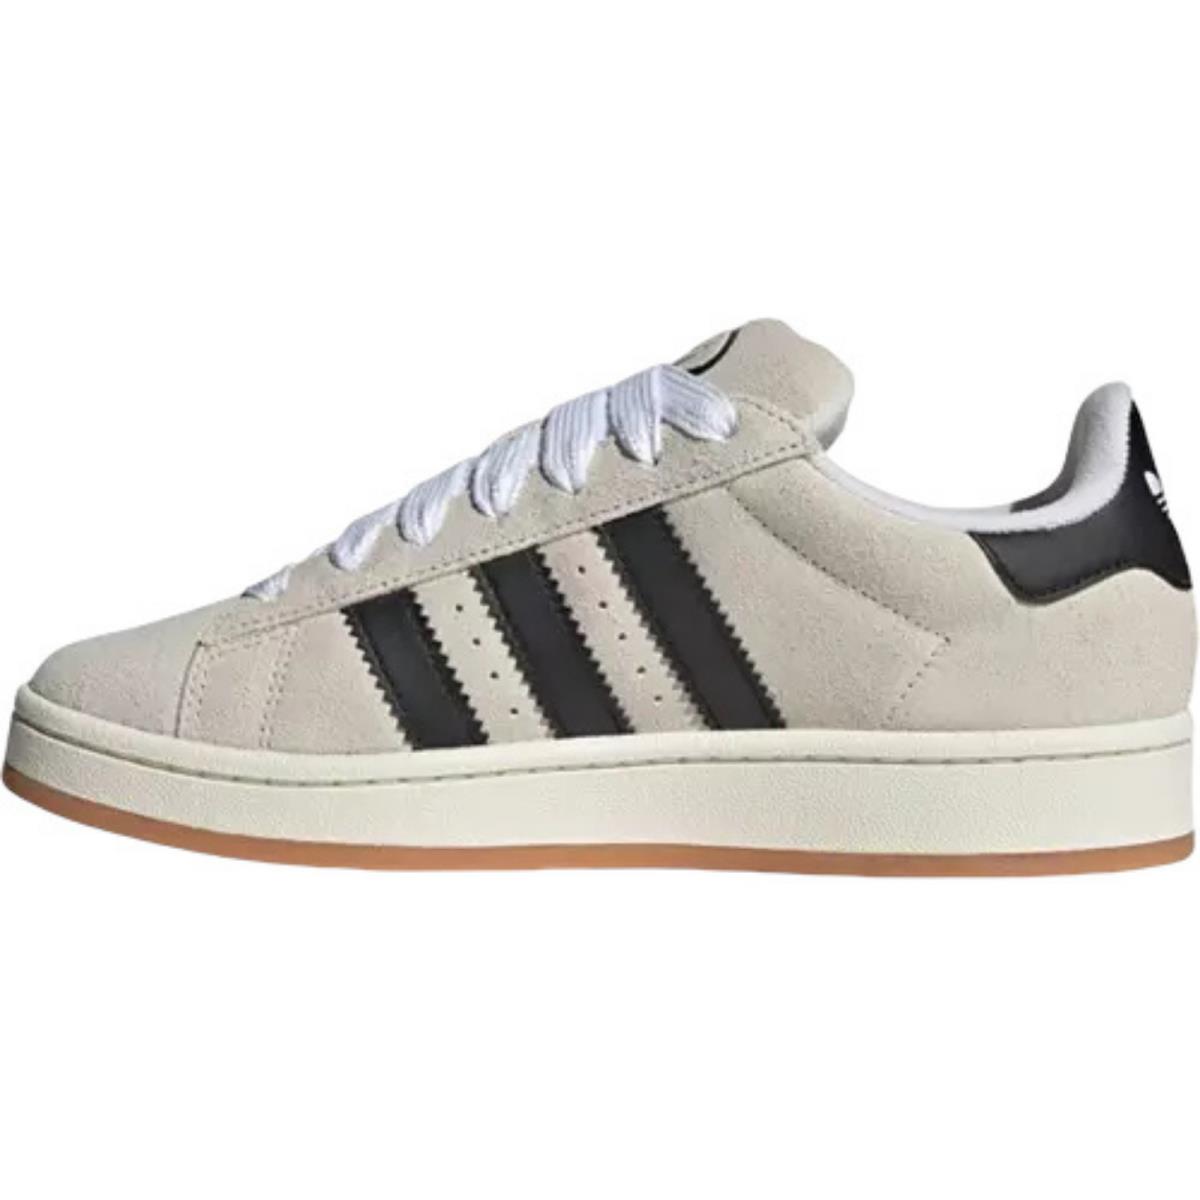 Adidas Originals Campus 00s Women`s Casual Shoes All Colors US Sizes 6-11 - Crystal White/Core Black/Off White